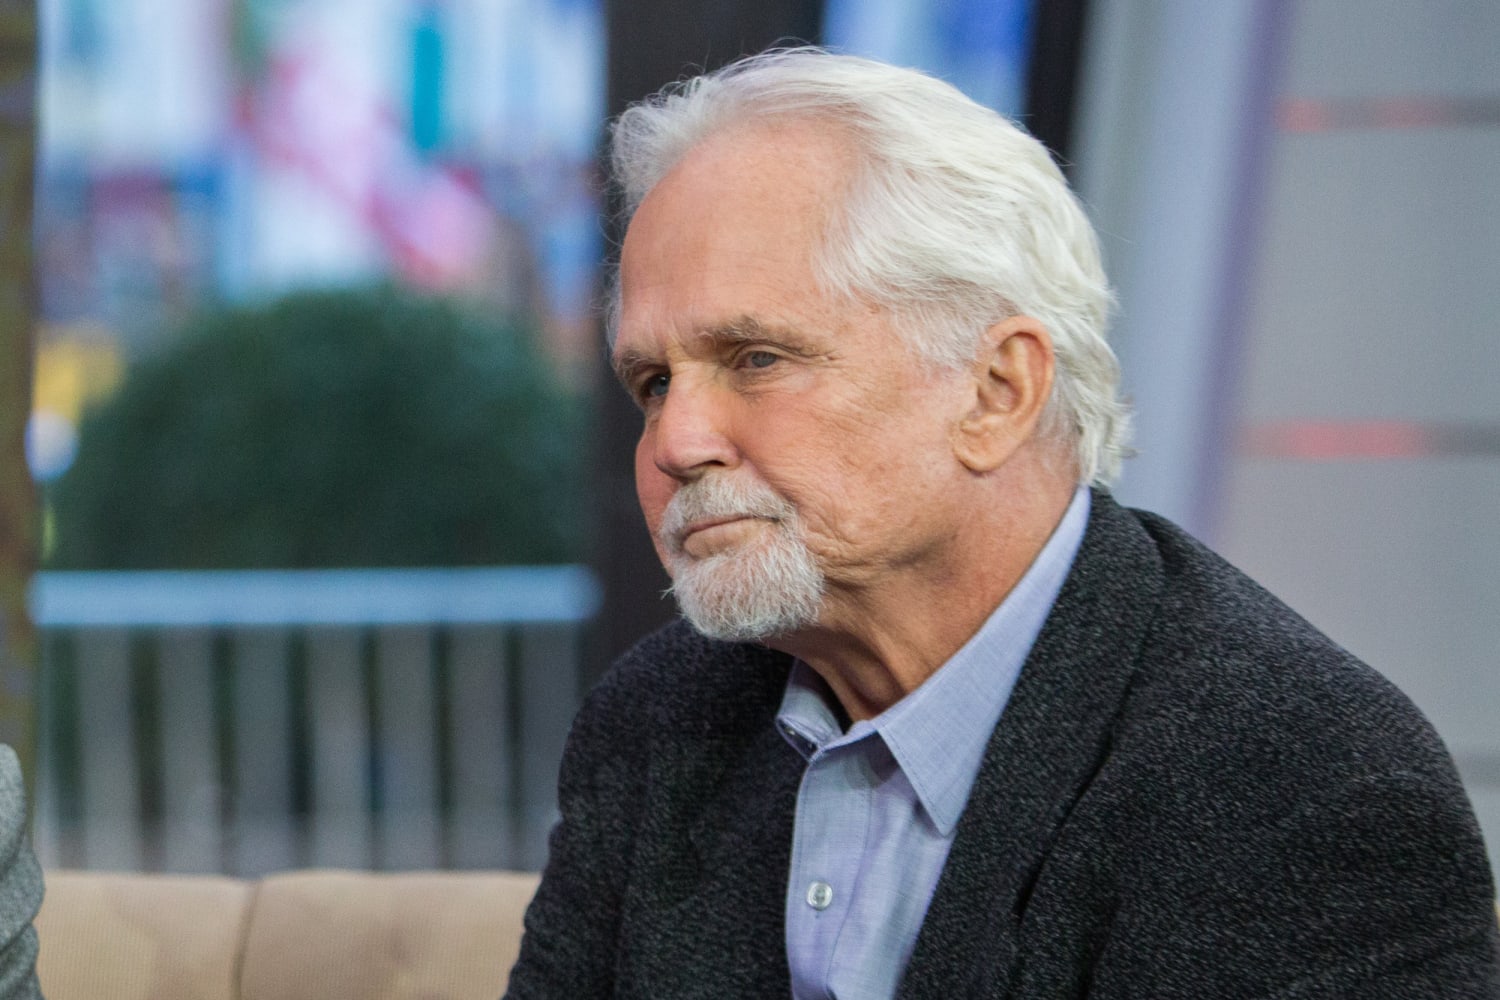 Leave It To Beaver Star Tony Dow Announces His Cancer Has Returned It Is Truly Heartbreaking